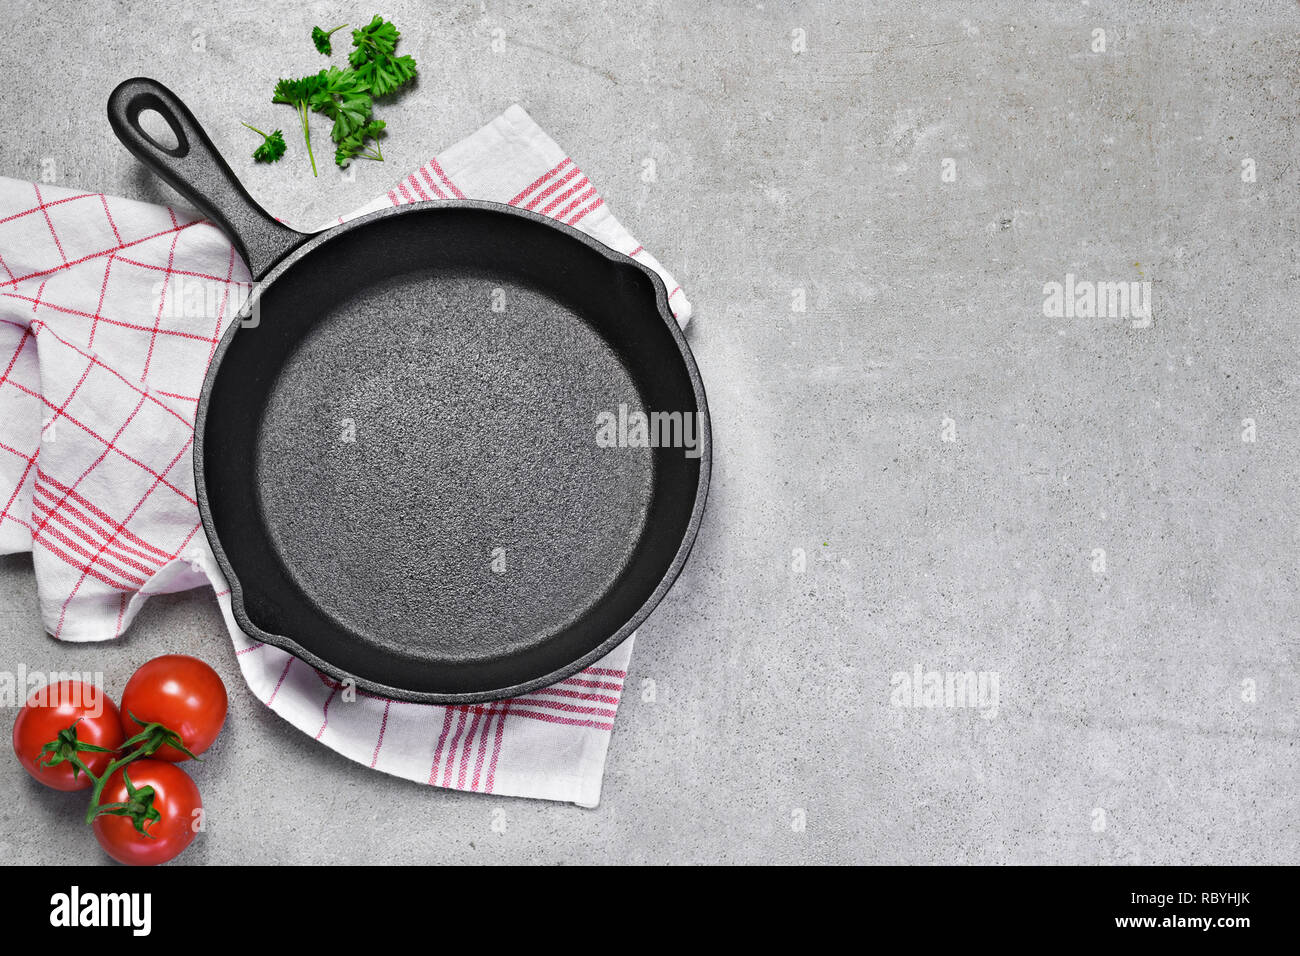 Cast iron pan on a grunge concrete background with copy space. Empty iron pan, top view or high angle shot with herbs and tomatoes.Cast iron pan on a Stock Photo